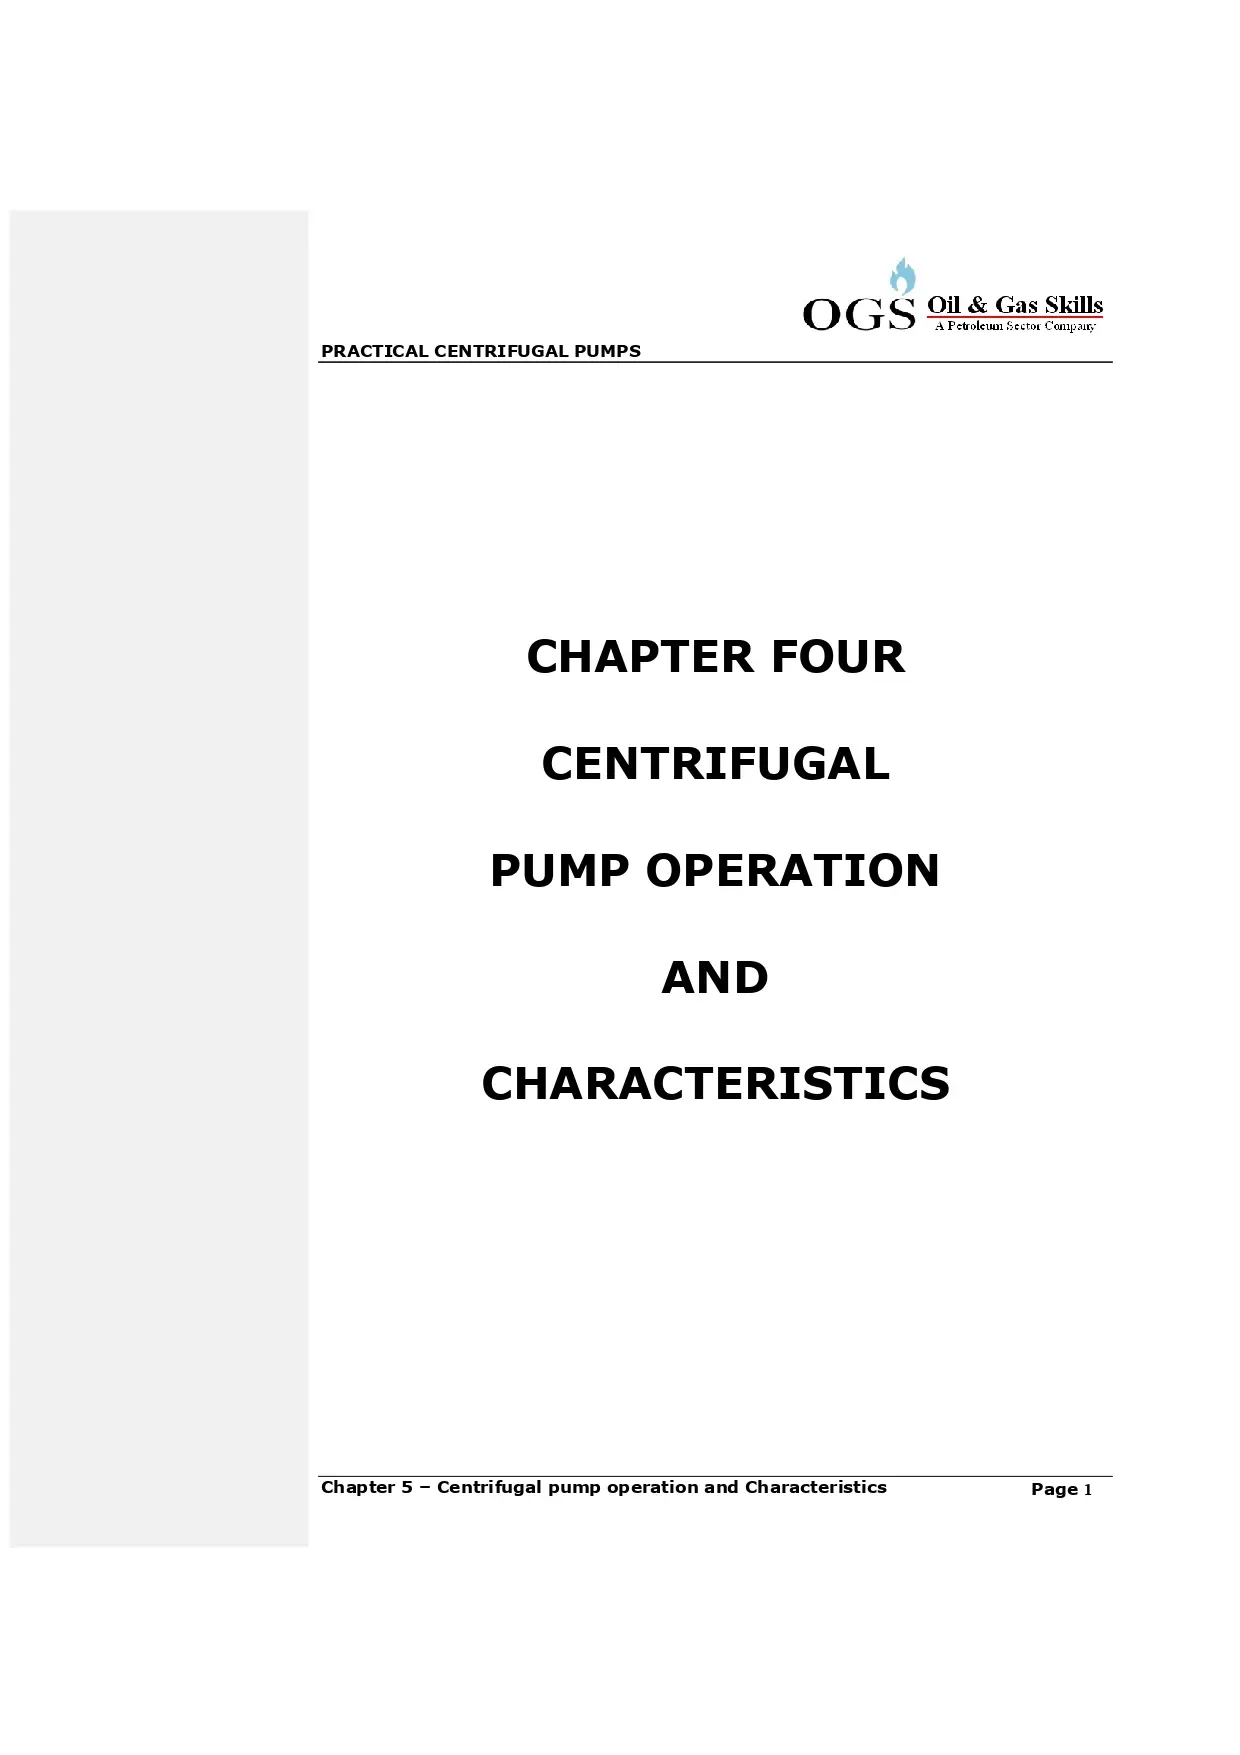 Chapter Four Centrifugal Pump Operation And Characteristics